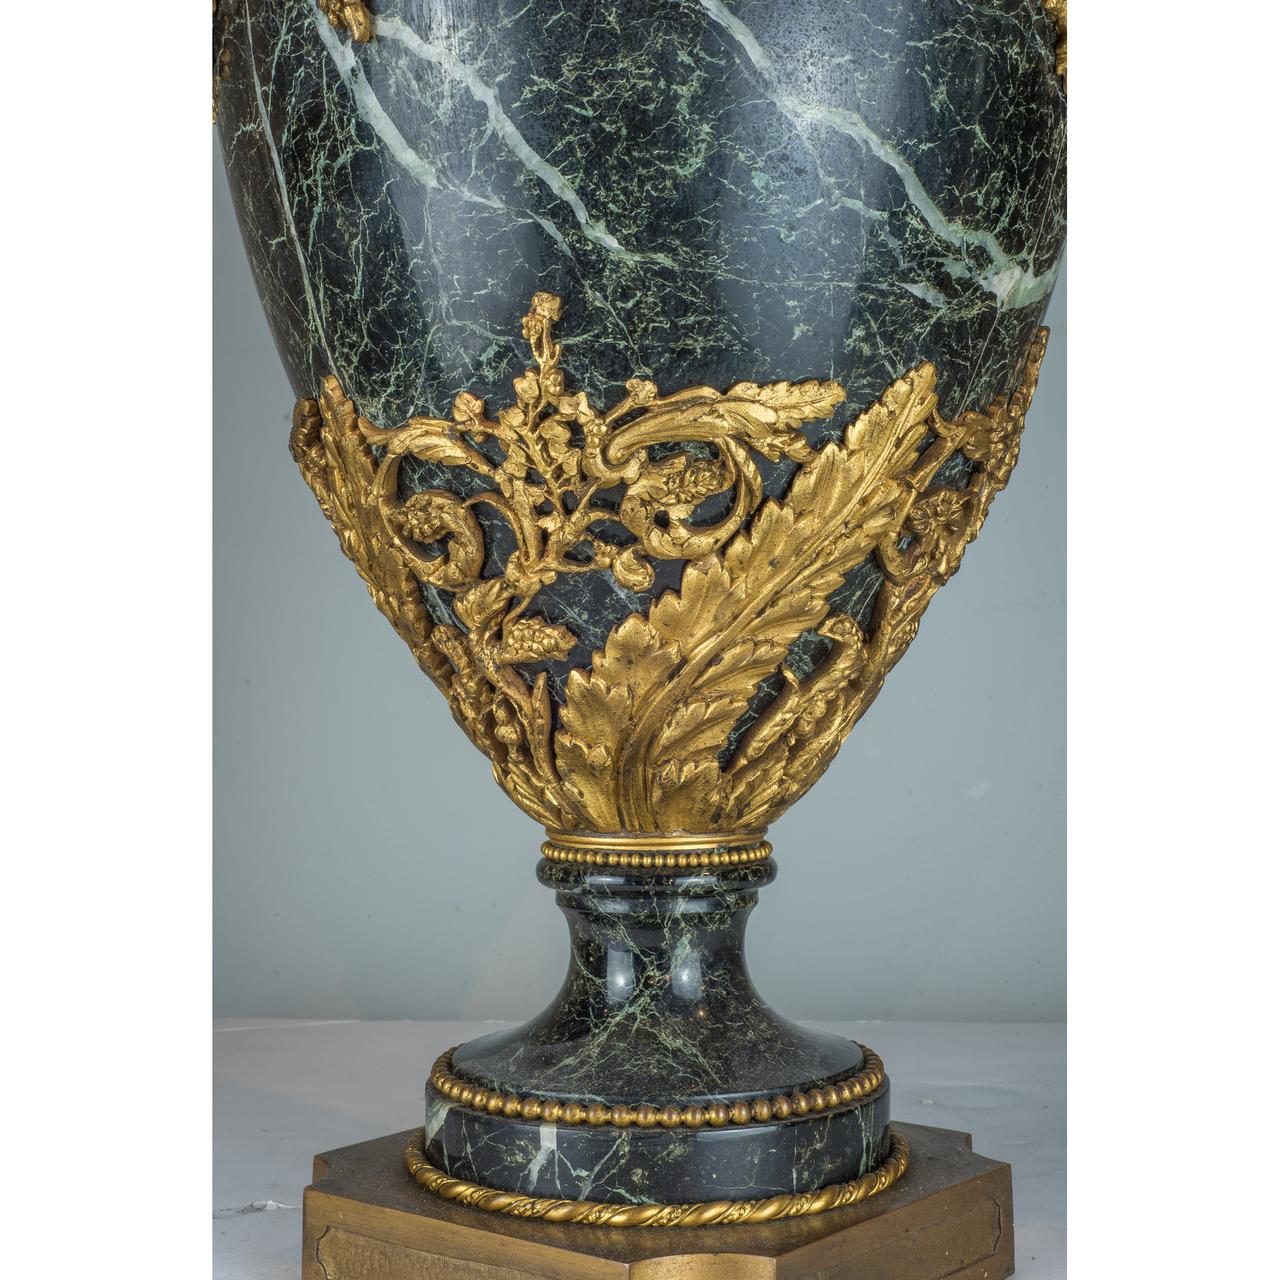 19th Century A Grand Ormolu-Mounted Verde Antico Marble Urns with Serpent Handles For Sale